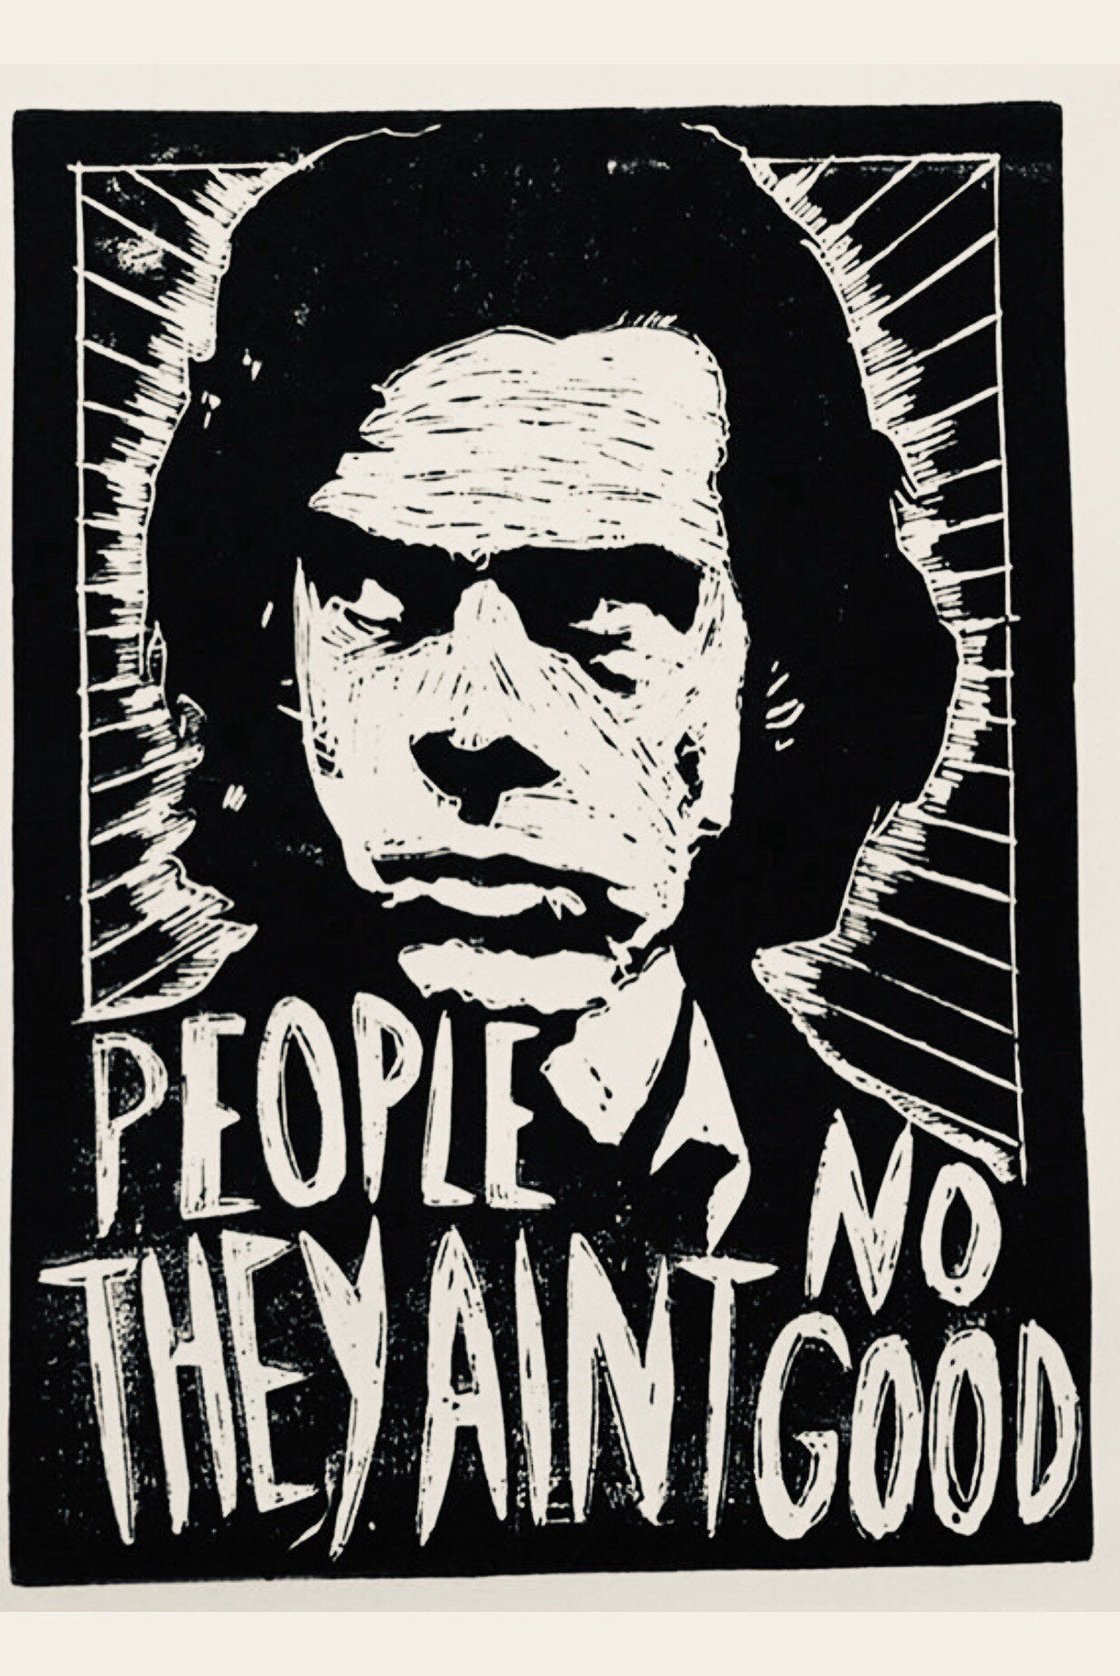 Image of Nick Cave. Hand Made. Original A4 linocut print. Limited and Signed. Art.